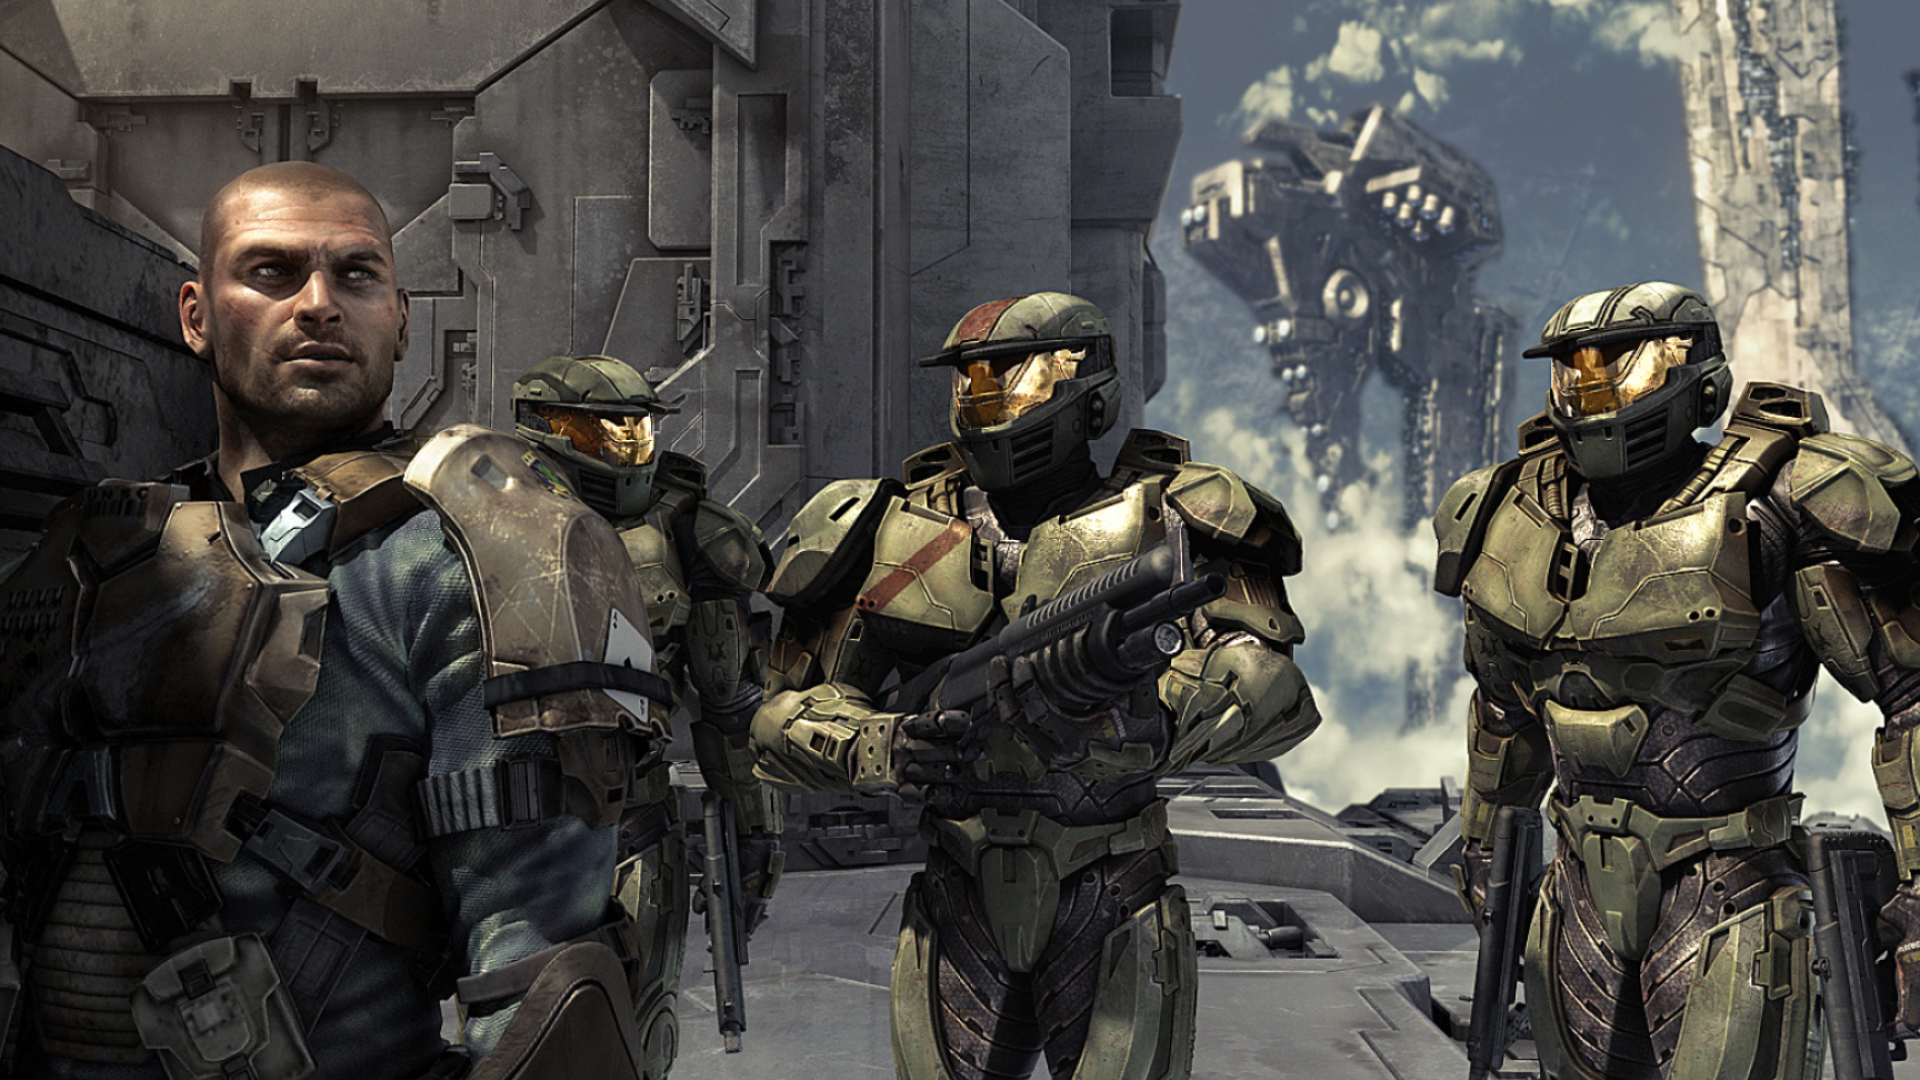 Halo Wars, Green Spartans, Iconic wallpaper, Power of the Halo universe, 1920x1080 Full HD Desktop